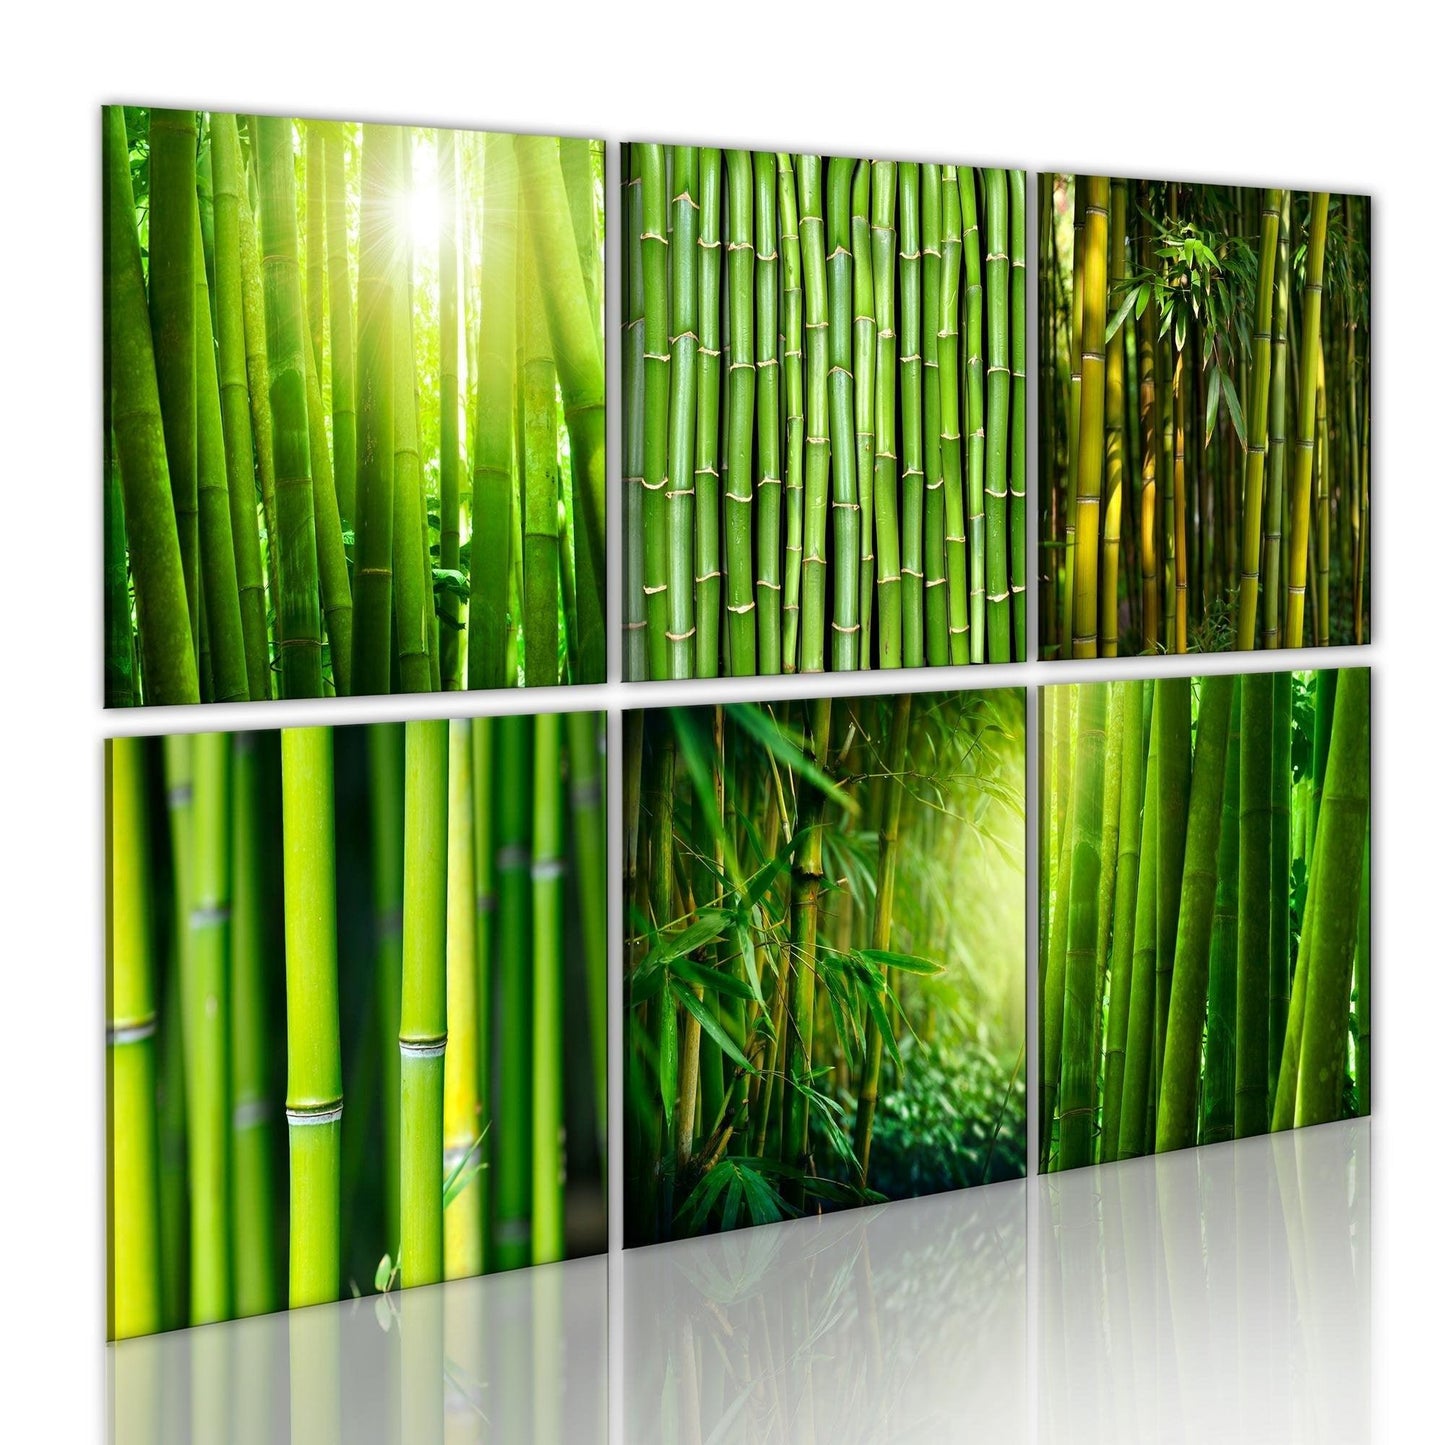 Canvas Print - Bamboo has many faces - www.trendingbestsellers.com